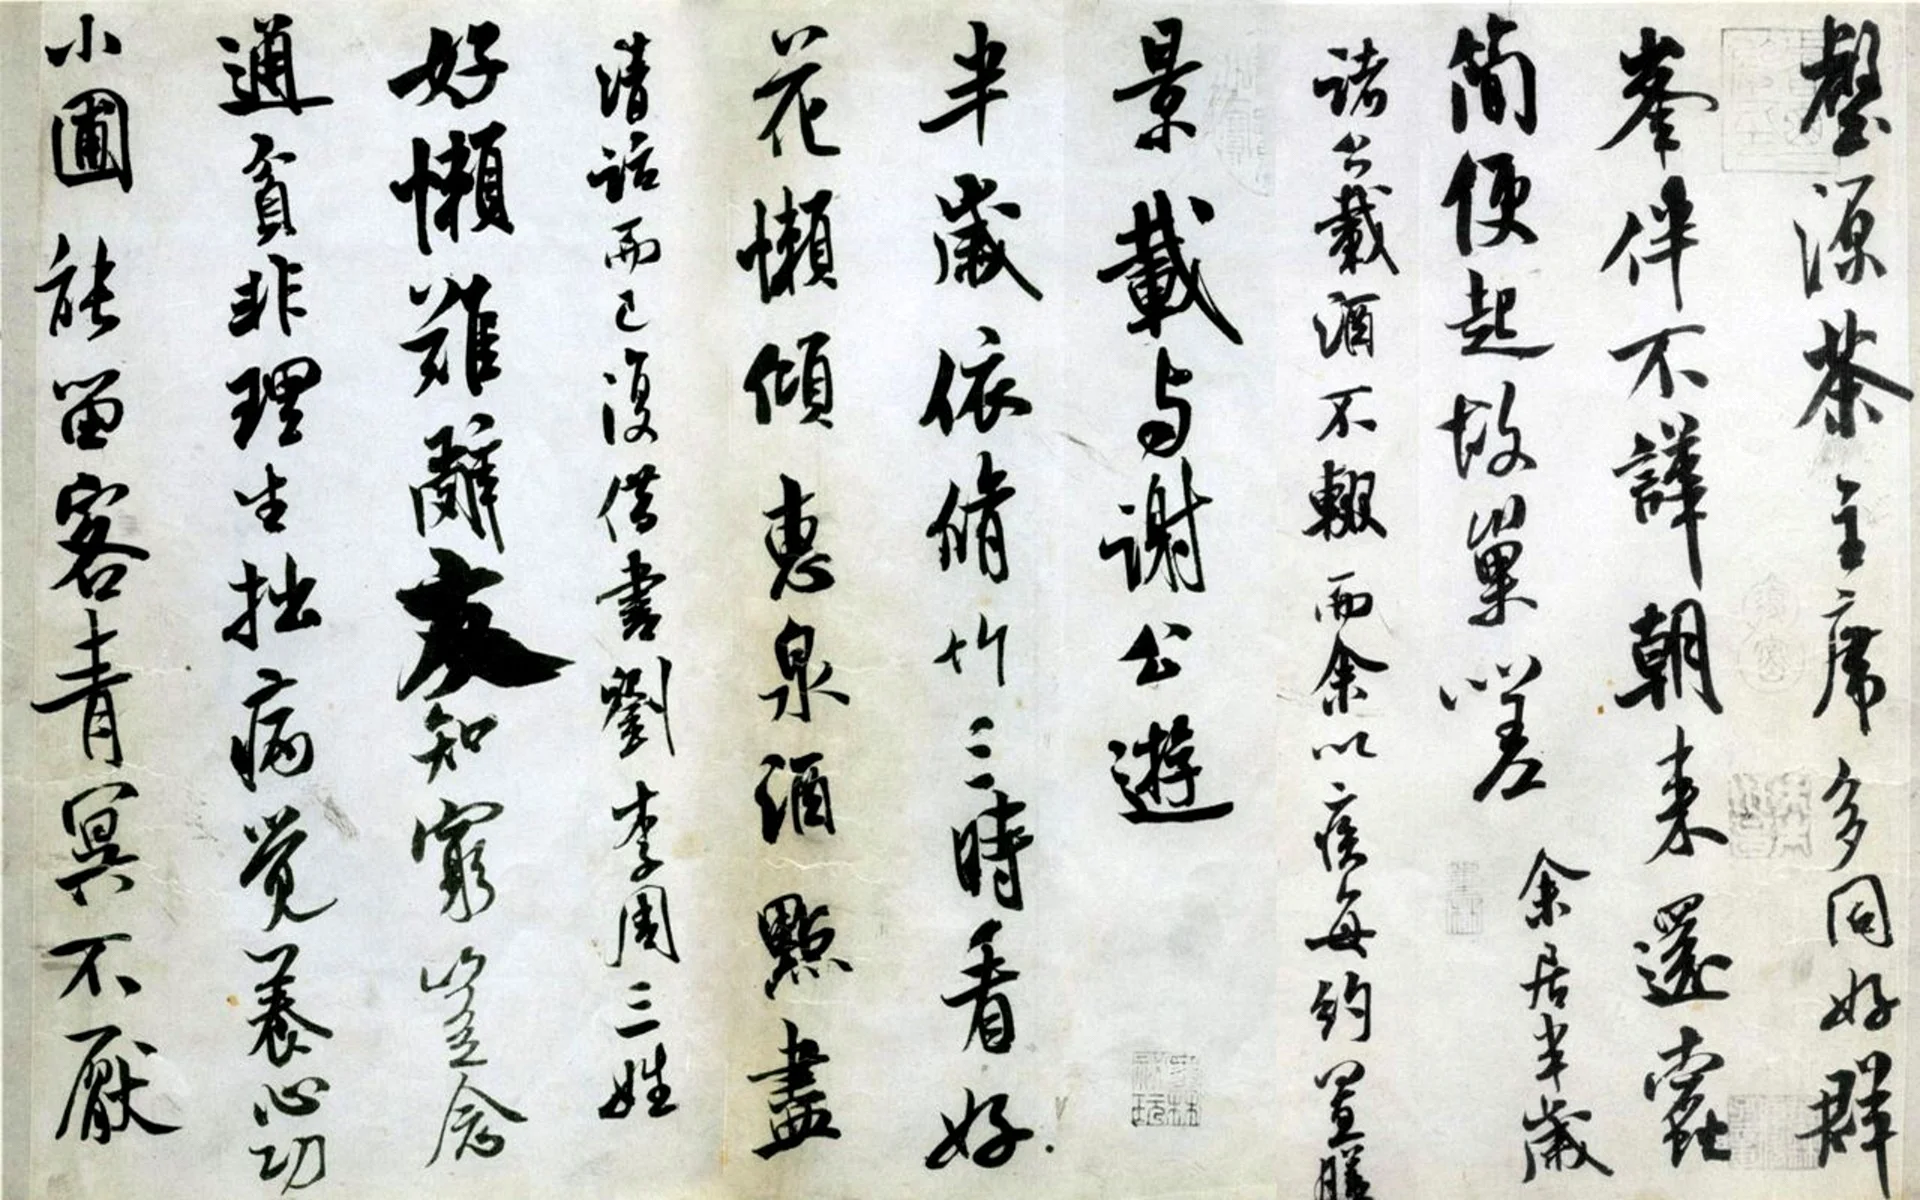 Chinese Calligraphy Wallpaper